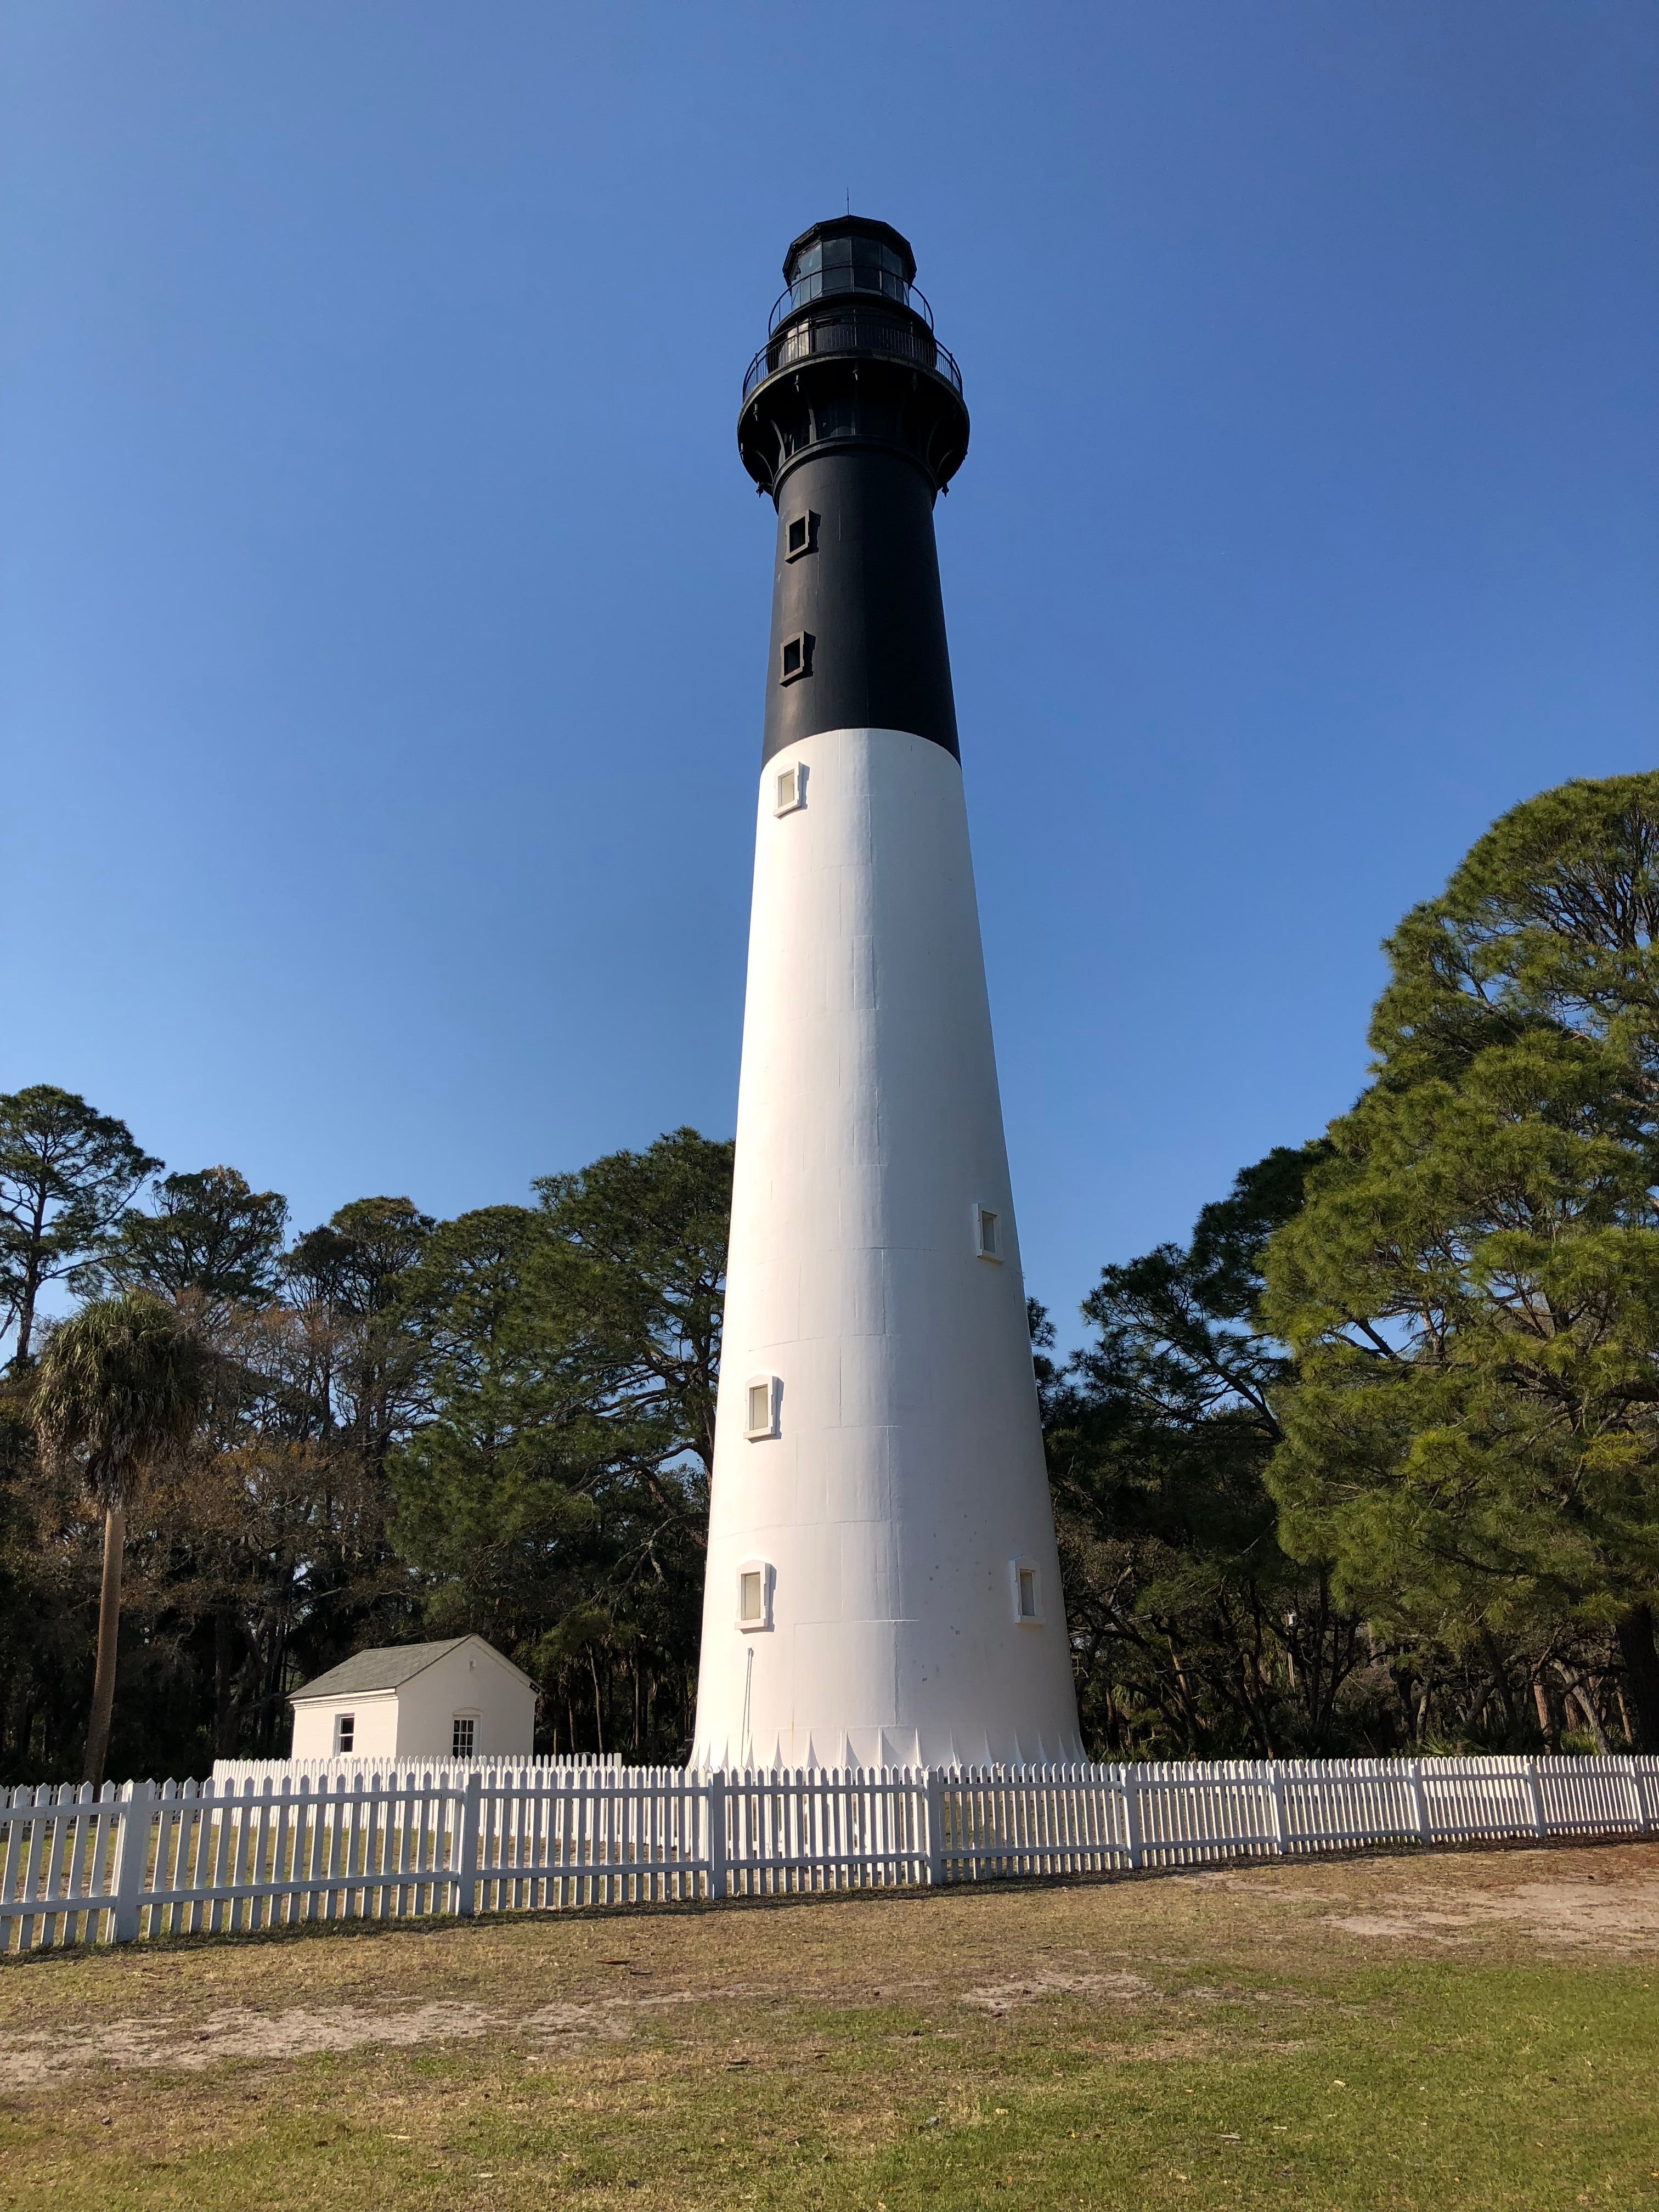 The lighthouse is within easy walking distance from the campground